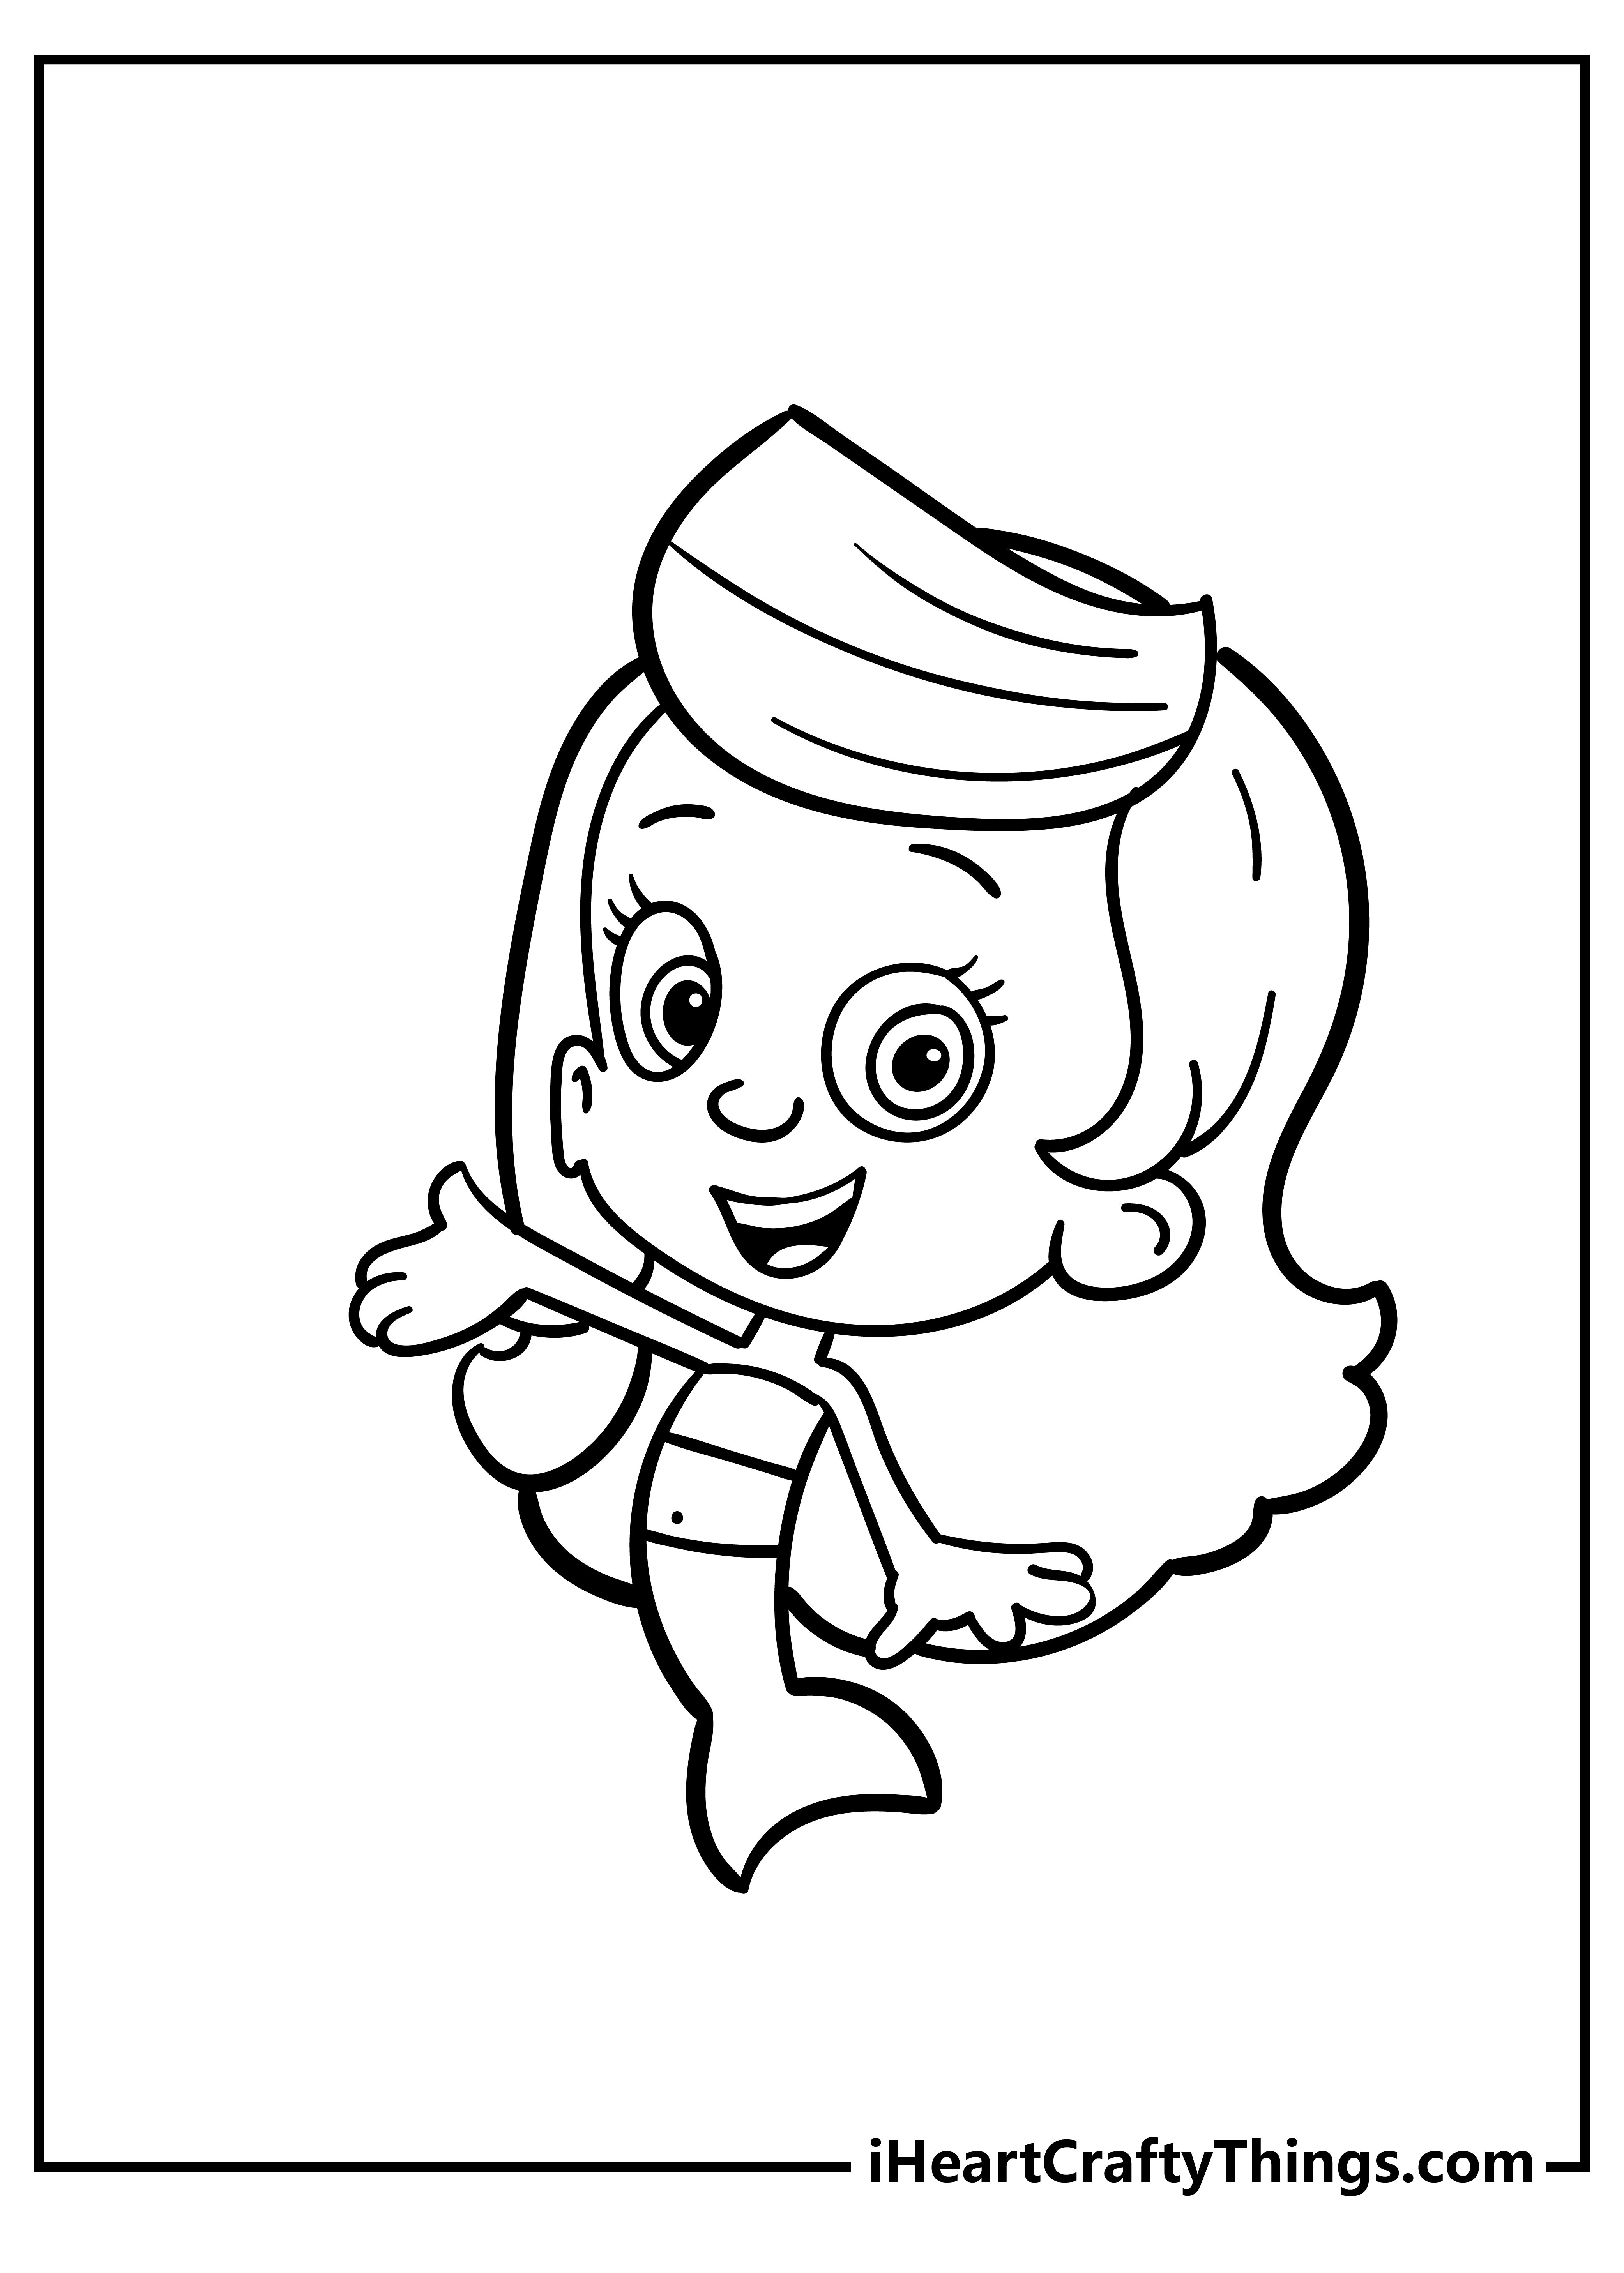 Bubble Guppies Coloring Pages for adults free printable